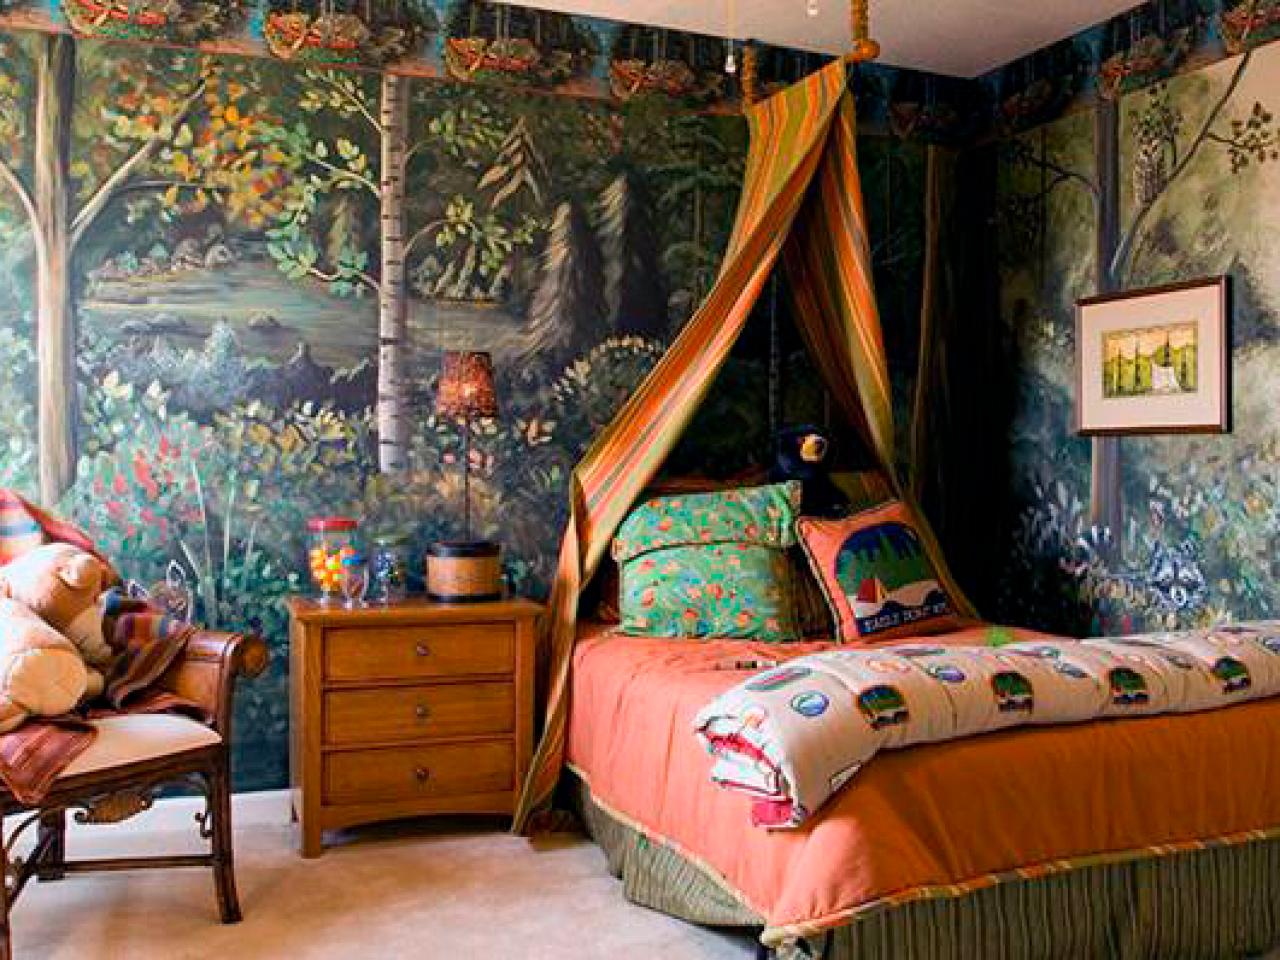 Outrageous Kids' Rooms | Home Remodeling - Ideas for Basements, Home